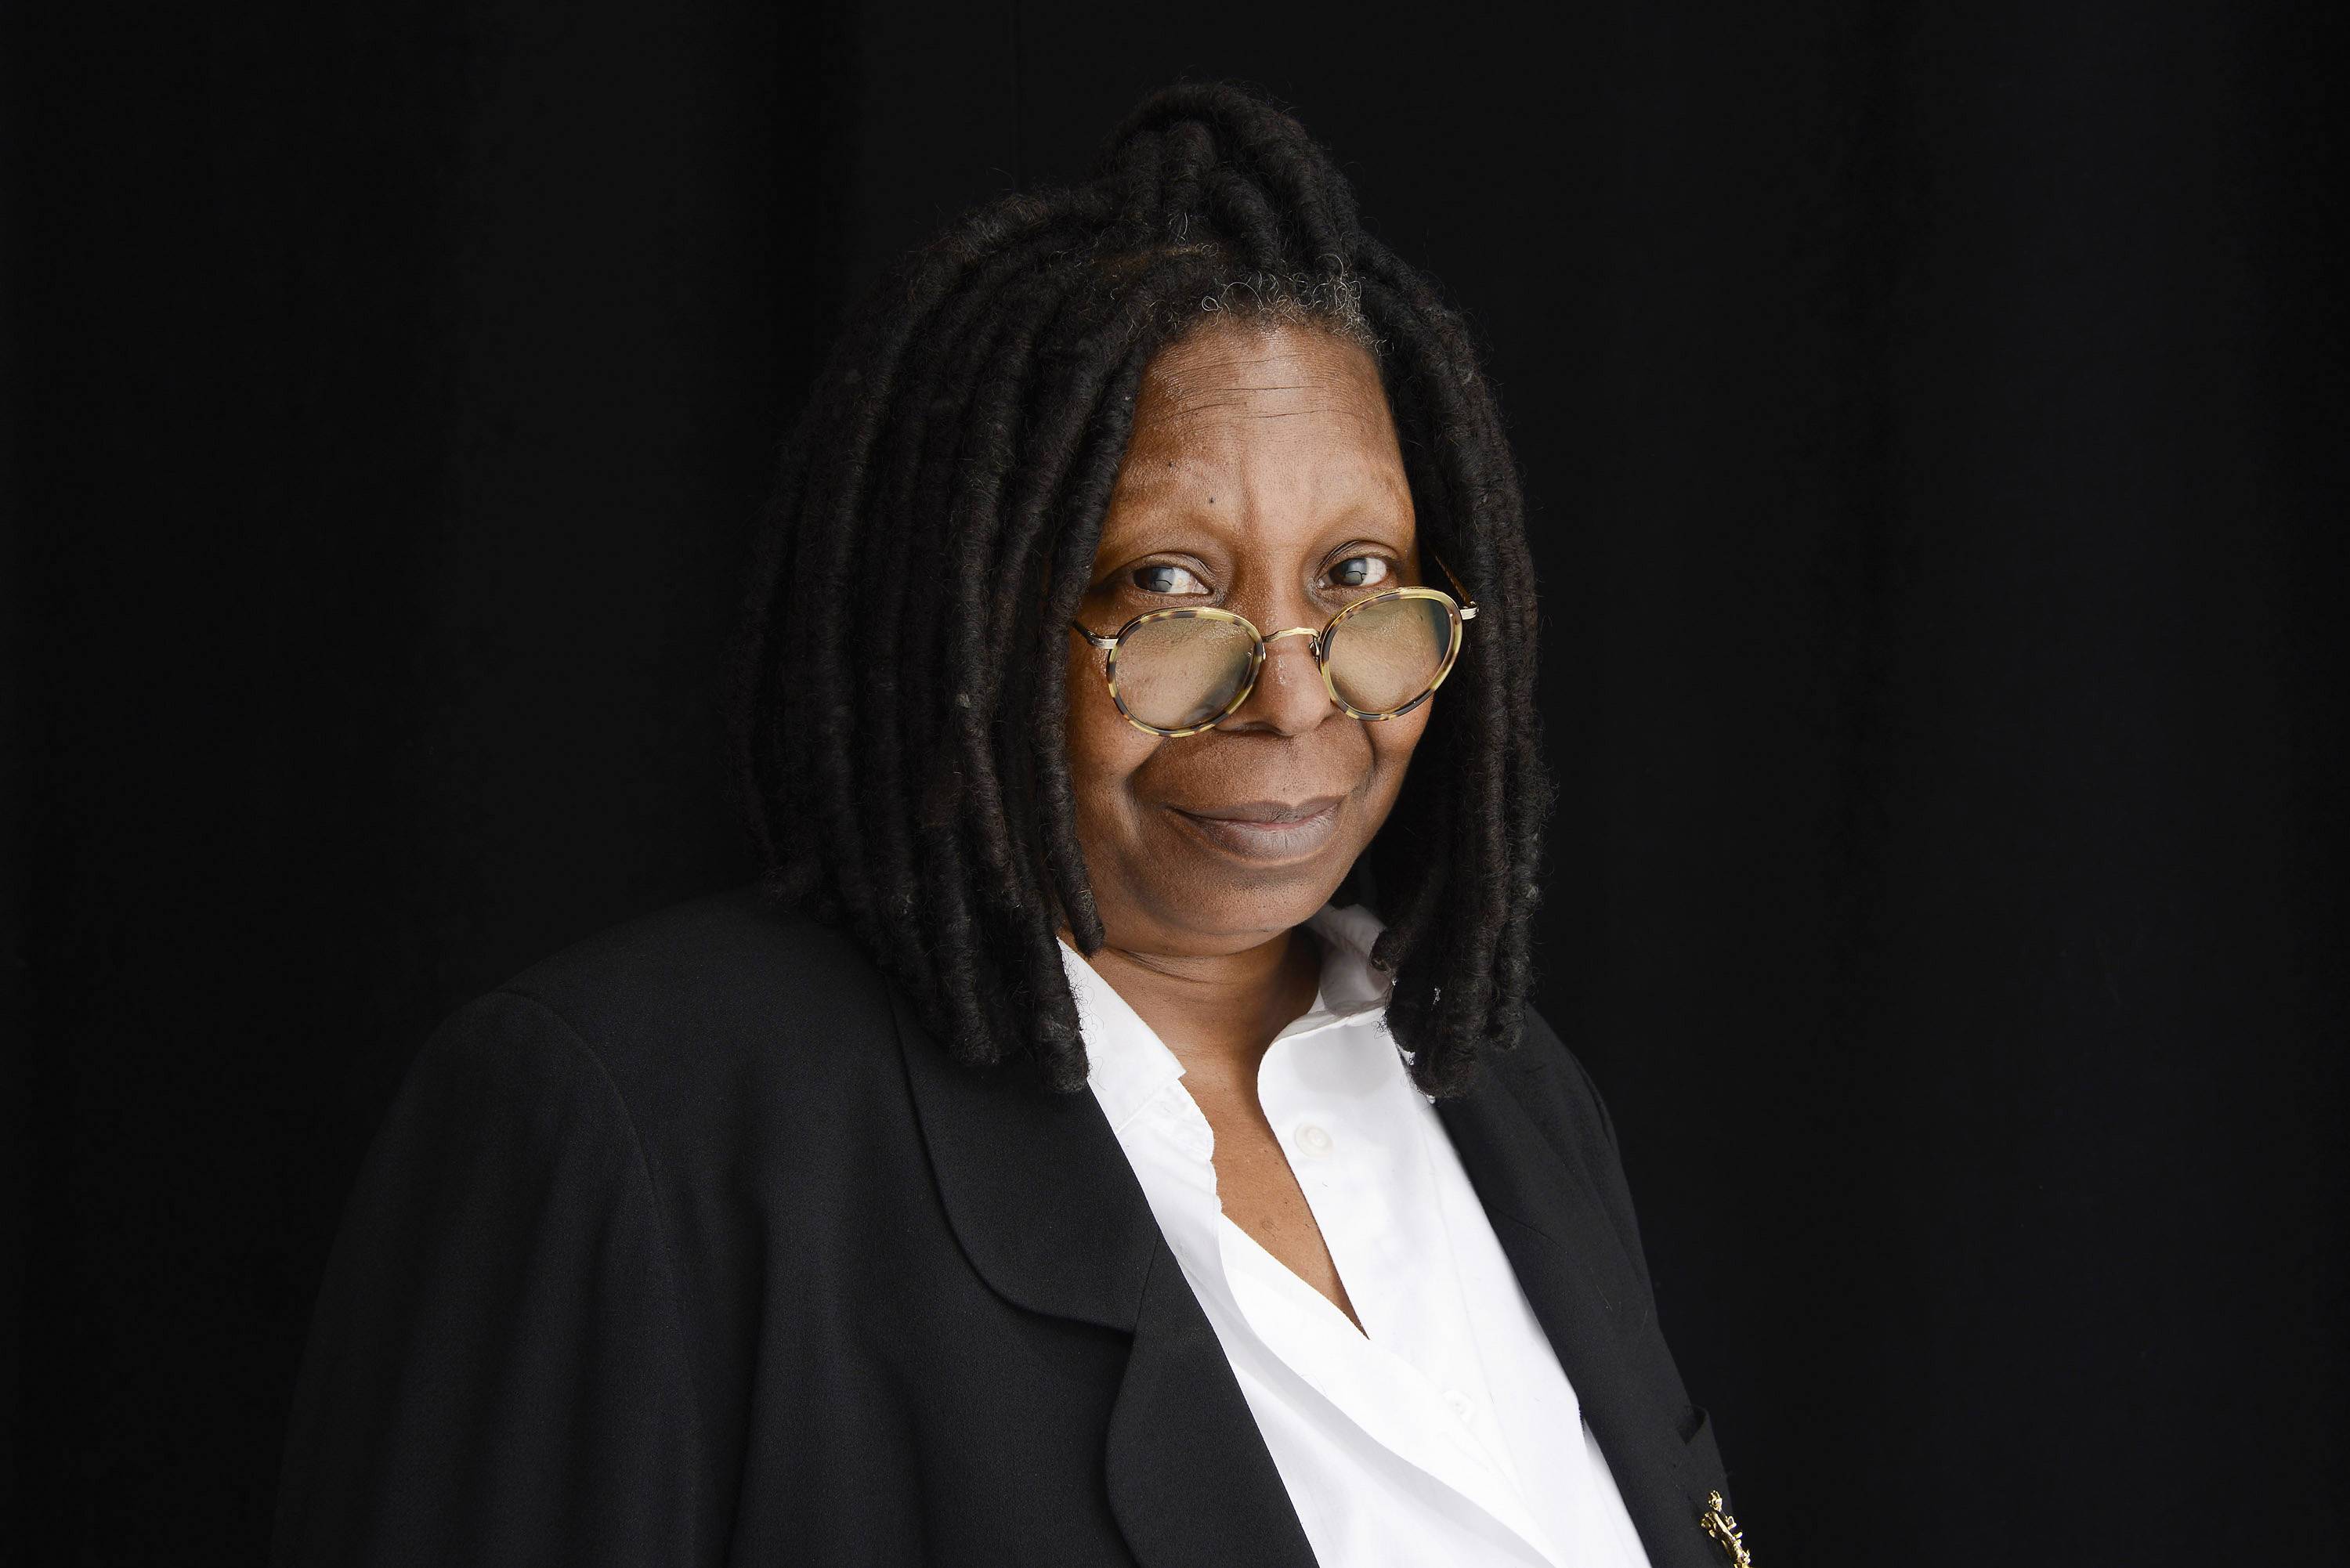 NEW YORK, NY - APRIL 19:  Whoopi Goldberg attends the Tribeca Film Festival 2013 portrait studio on April 19, 2013 in New York City.  (Photo by Larry Busacca/Getty Images)